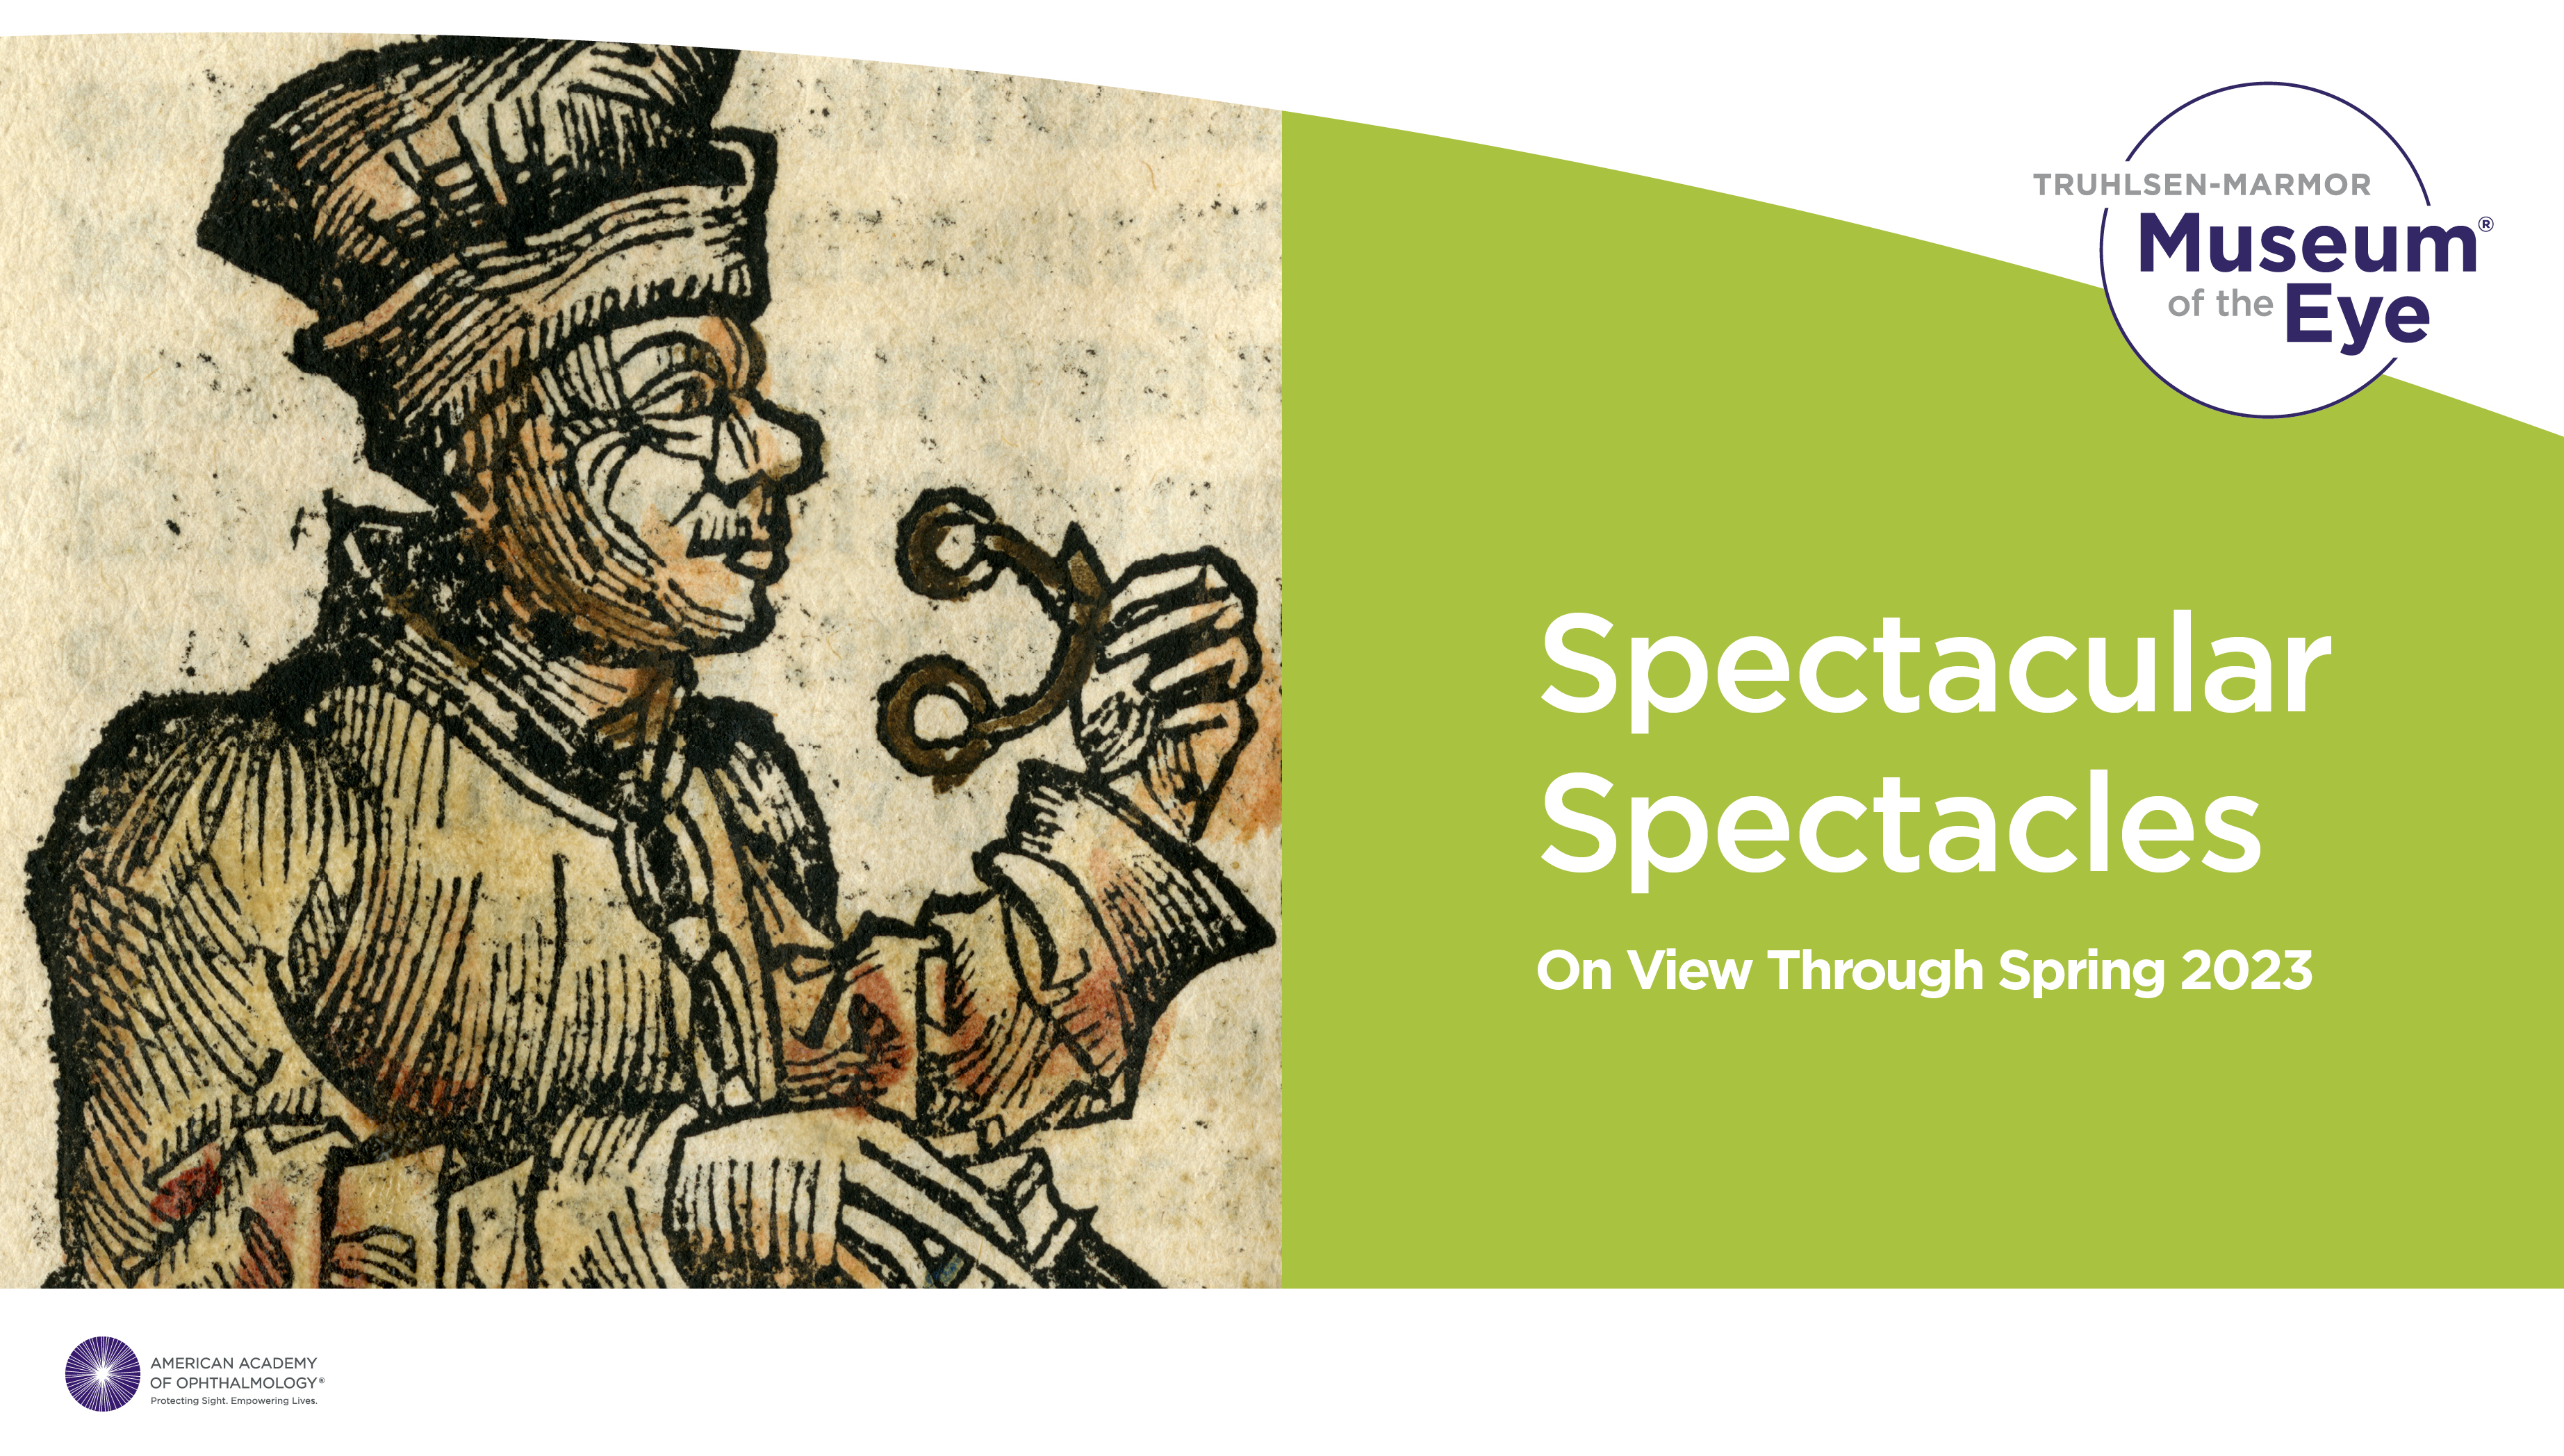 On the left side of this image is a light brown colored, wood cut drawing of a man in a 15th century style hat and robes holding two lenses with a hinge in the center. The other side of the image is white text on a green background that reads TRUHLSEN-MARMOR MUSEUM OF THE EYE SPECTACULAR SPECTACLES ON VIEW THROUGH SPRING 2023.